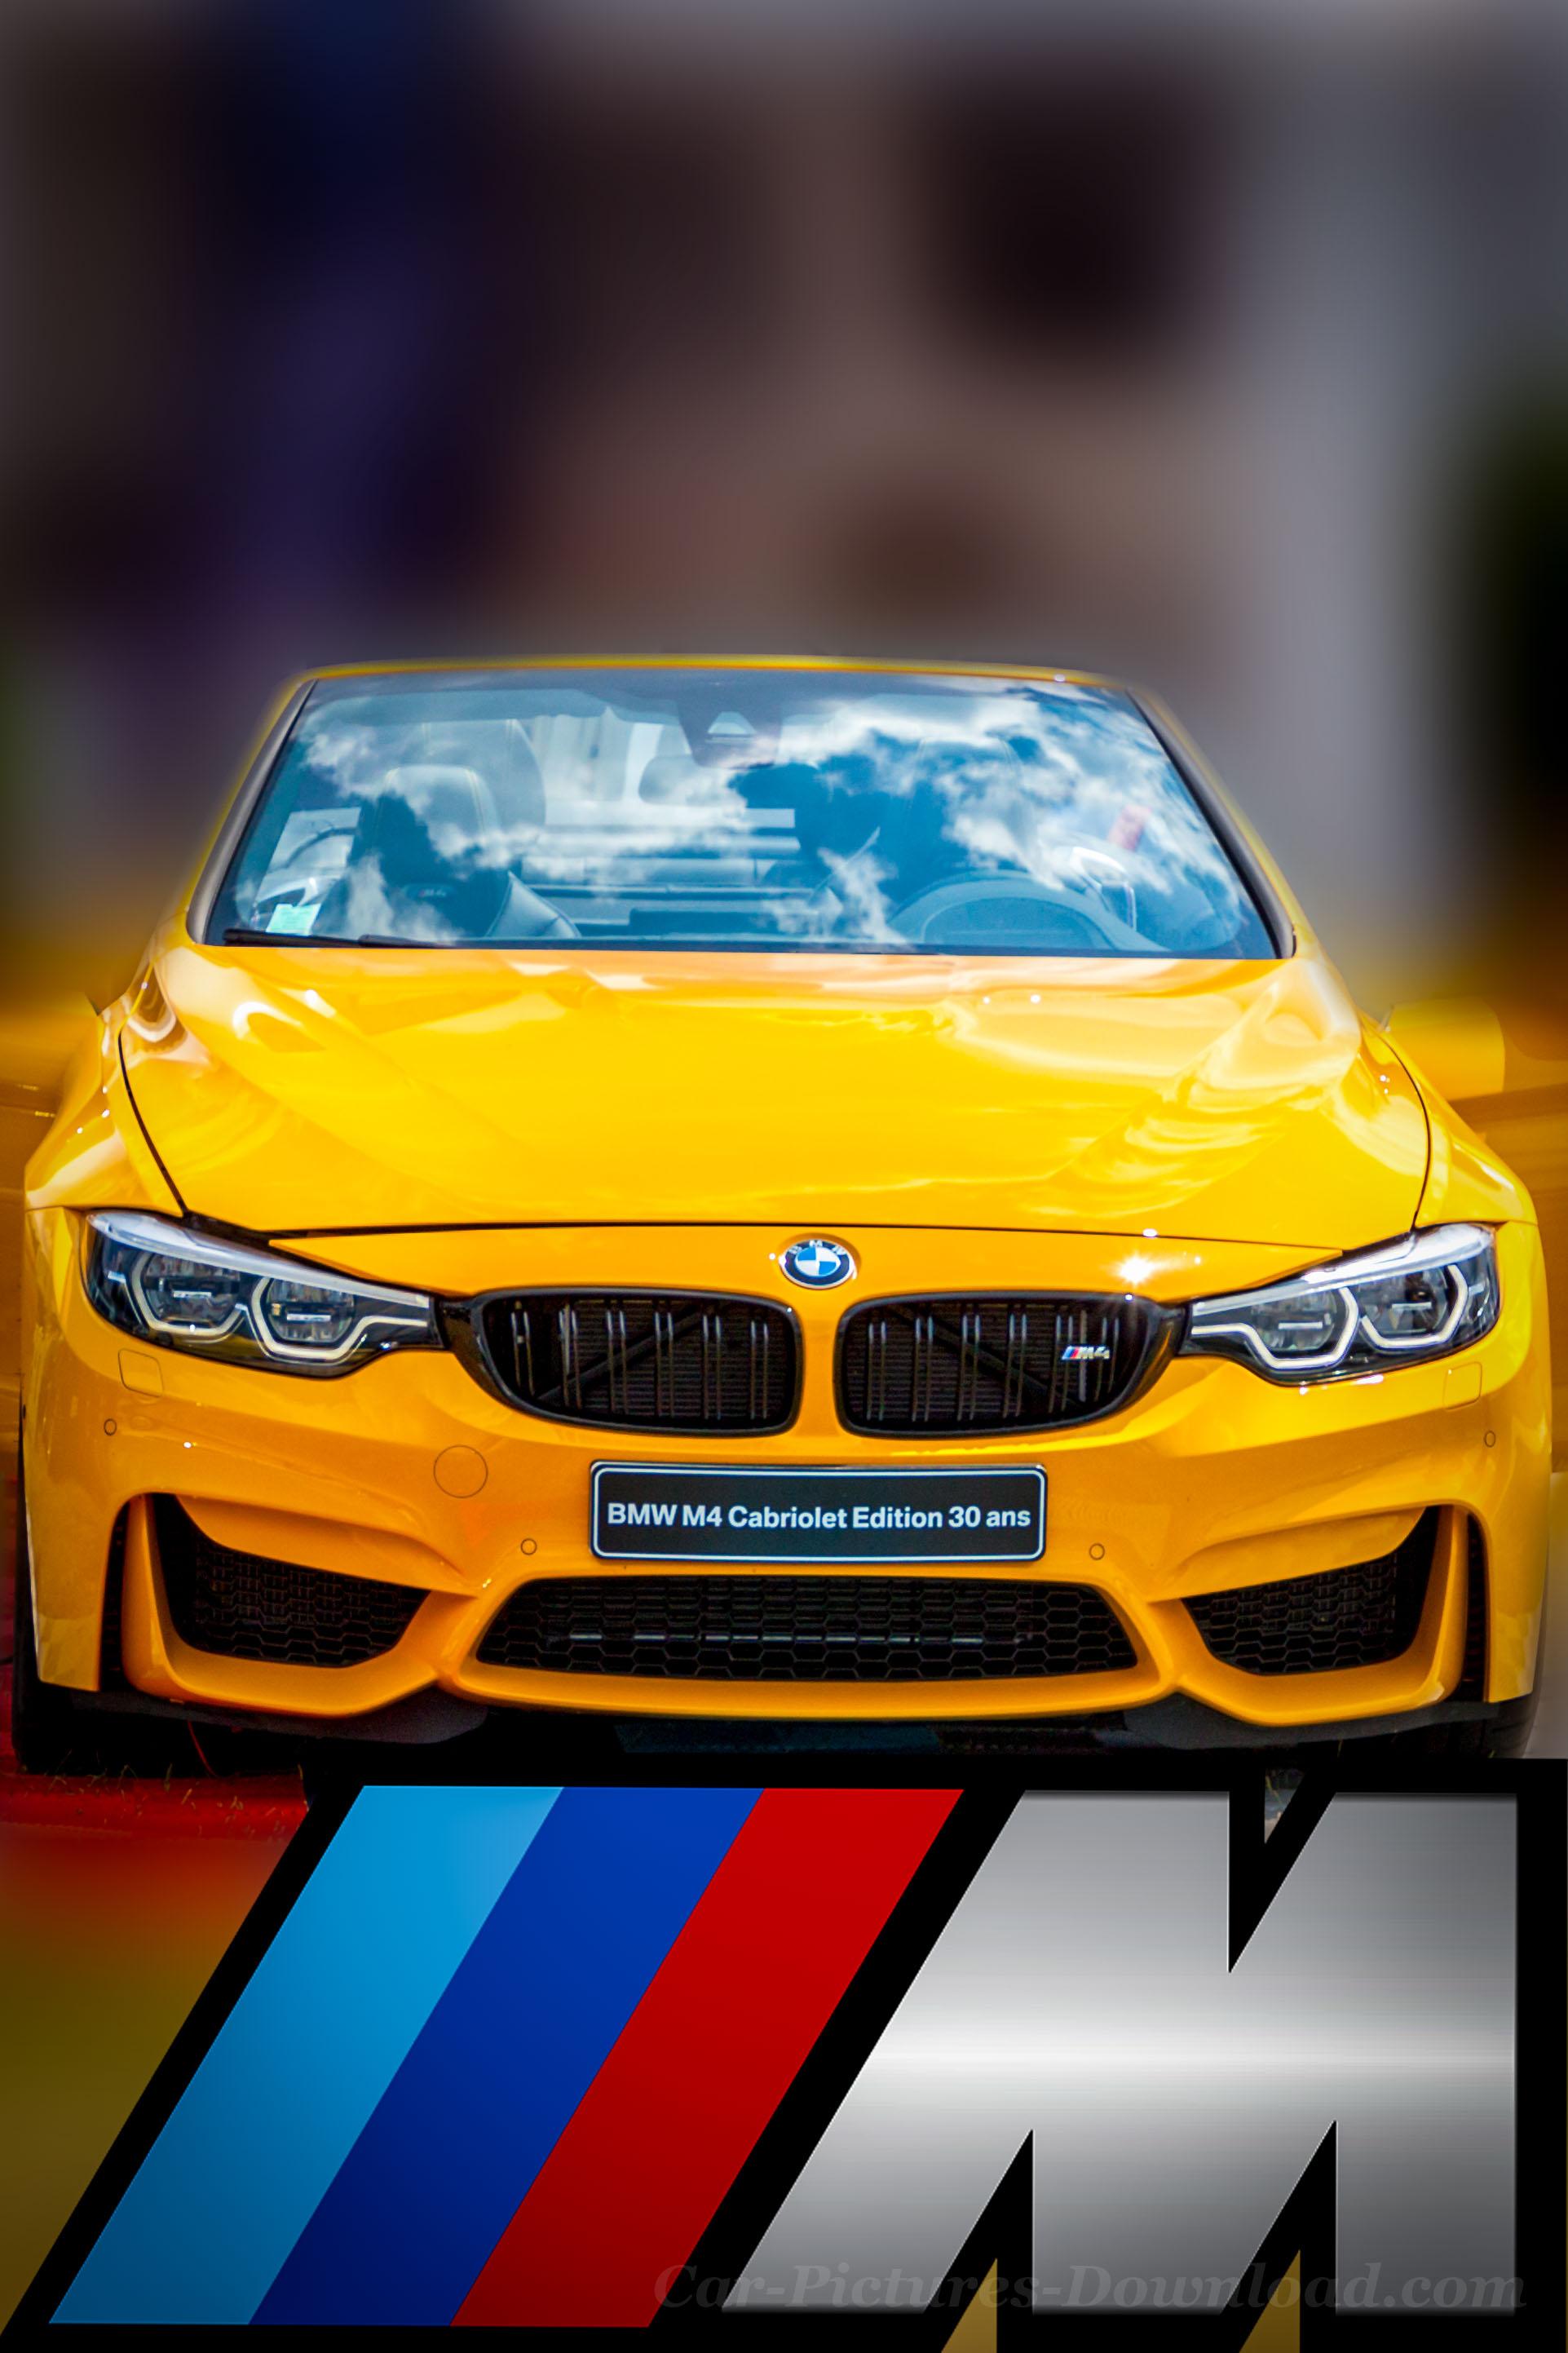 BMW M4 Wallpaper Picture HD Image Download